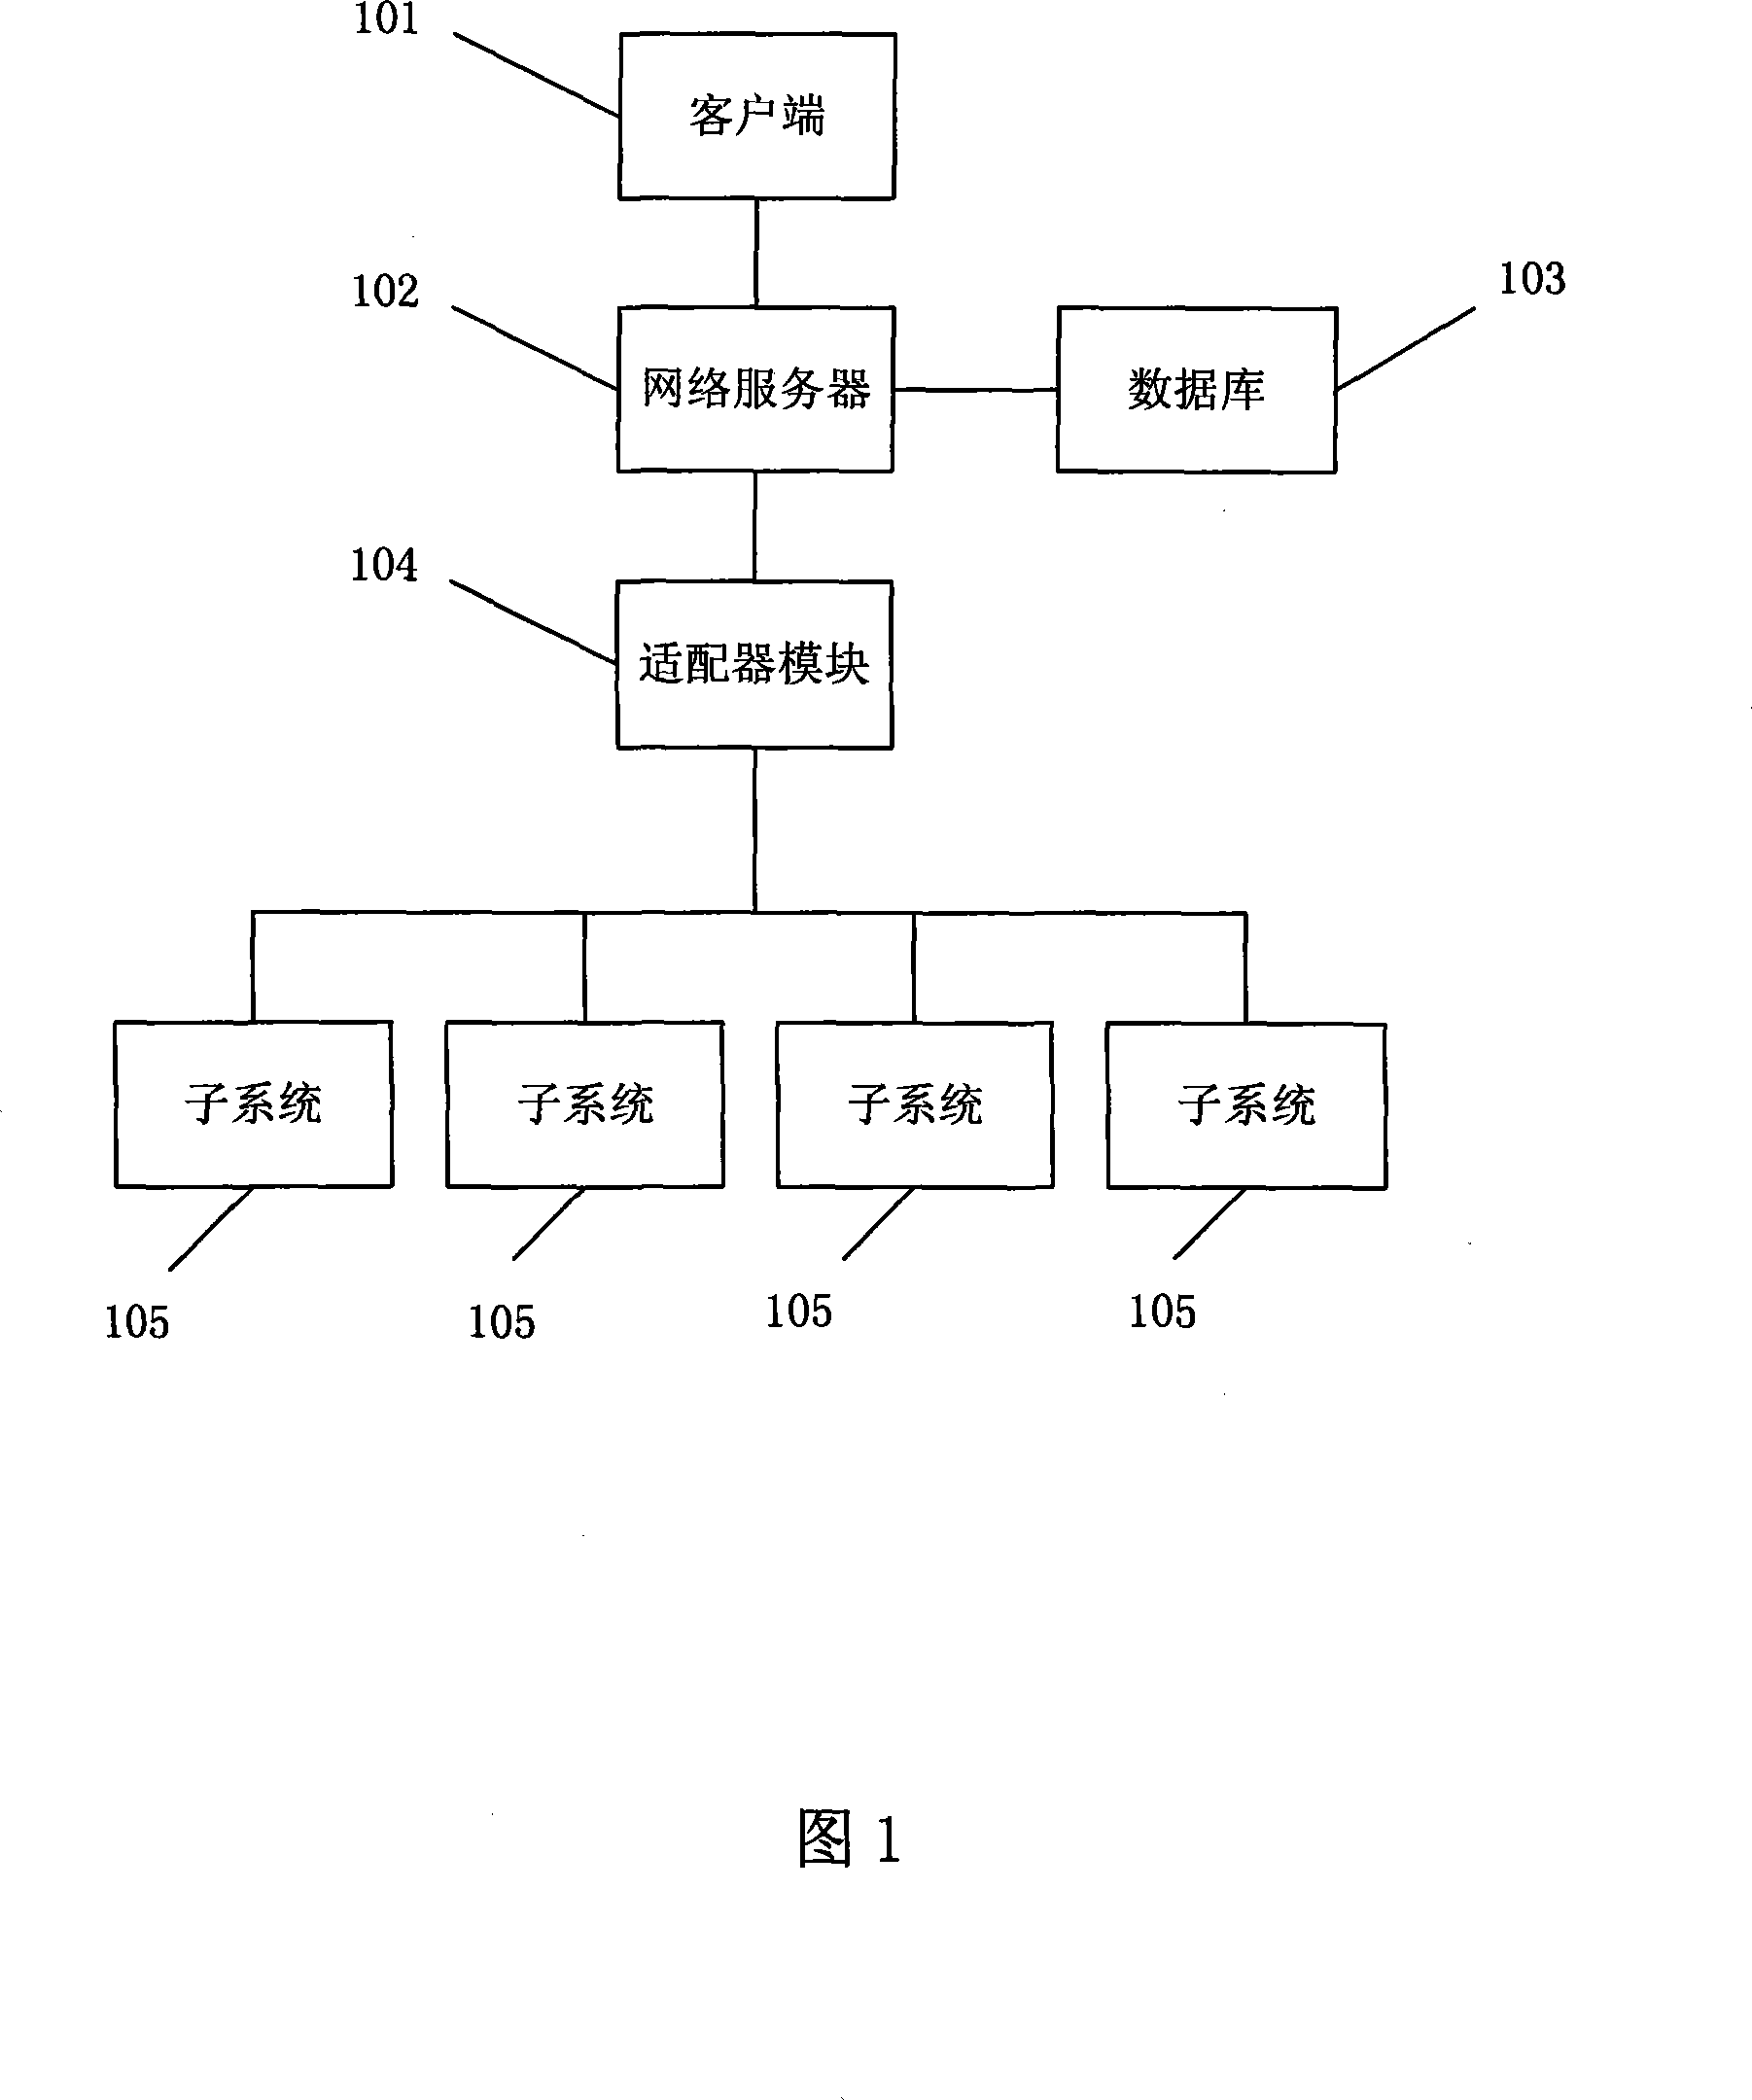 Method and system for providing client information